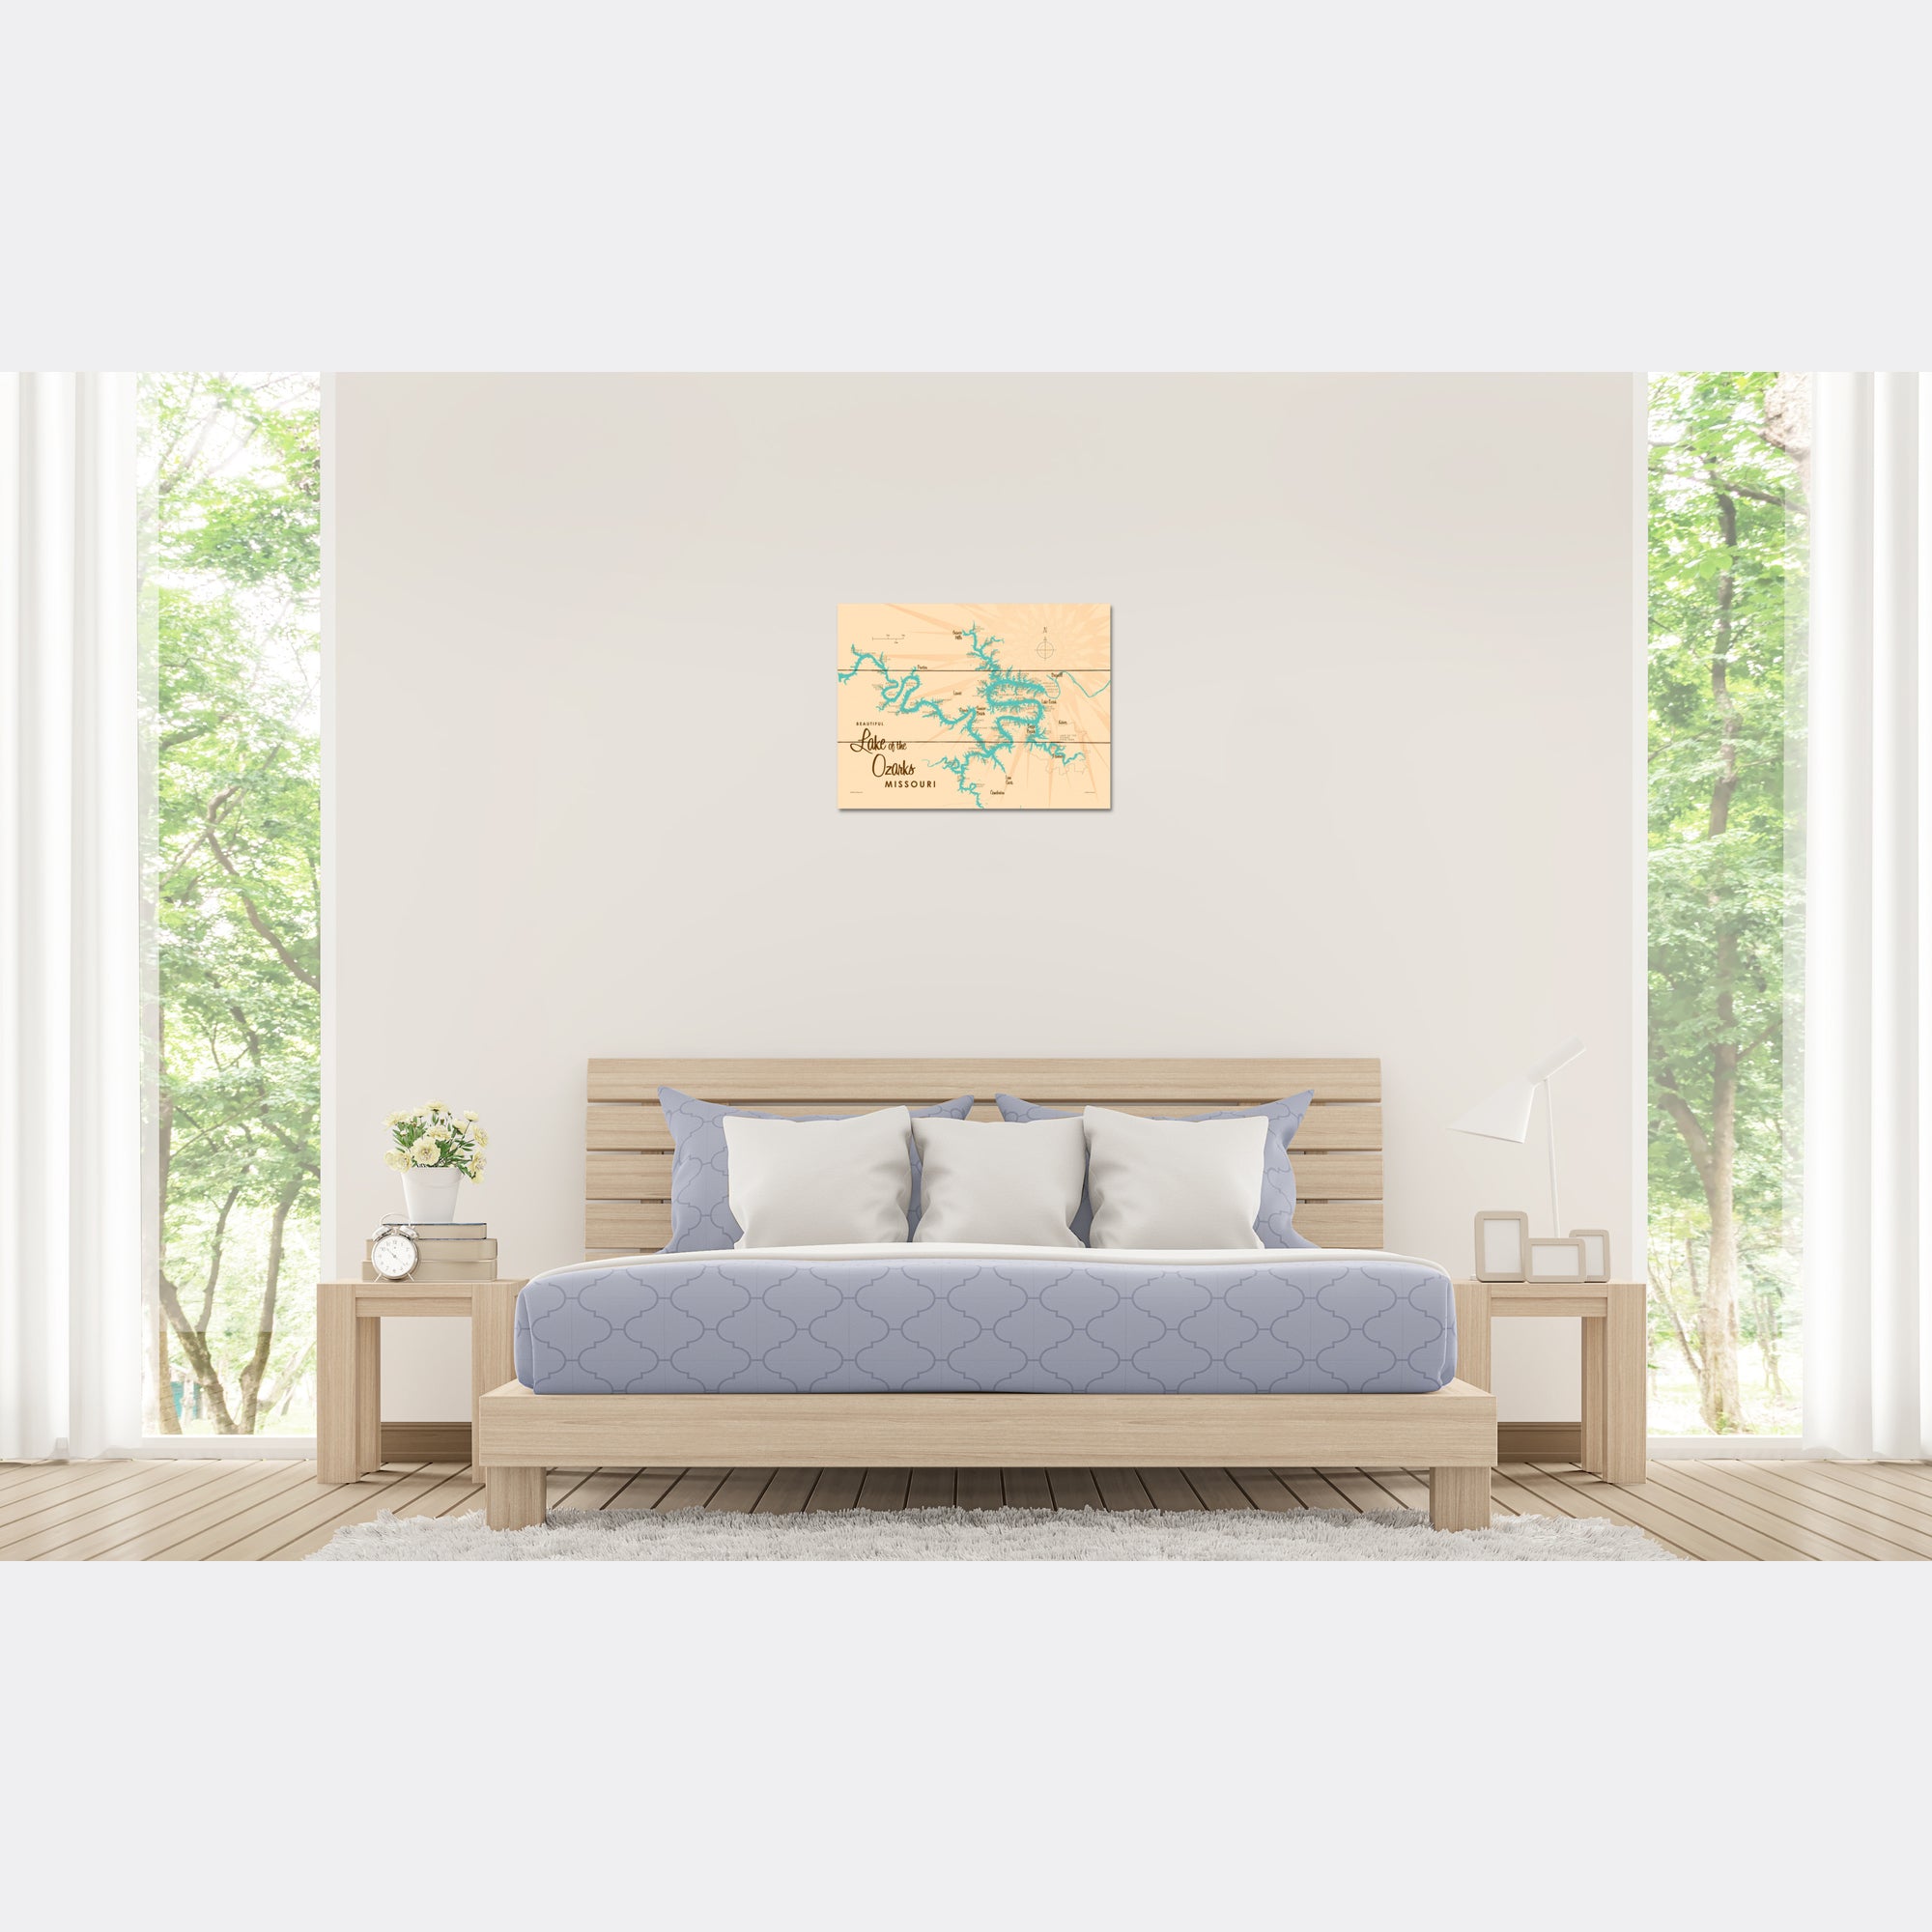 Lake of the Ozarks Missouri (with Mile Markers), Wood Sign Map Art